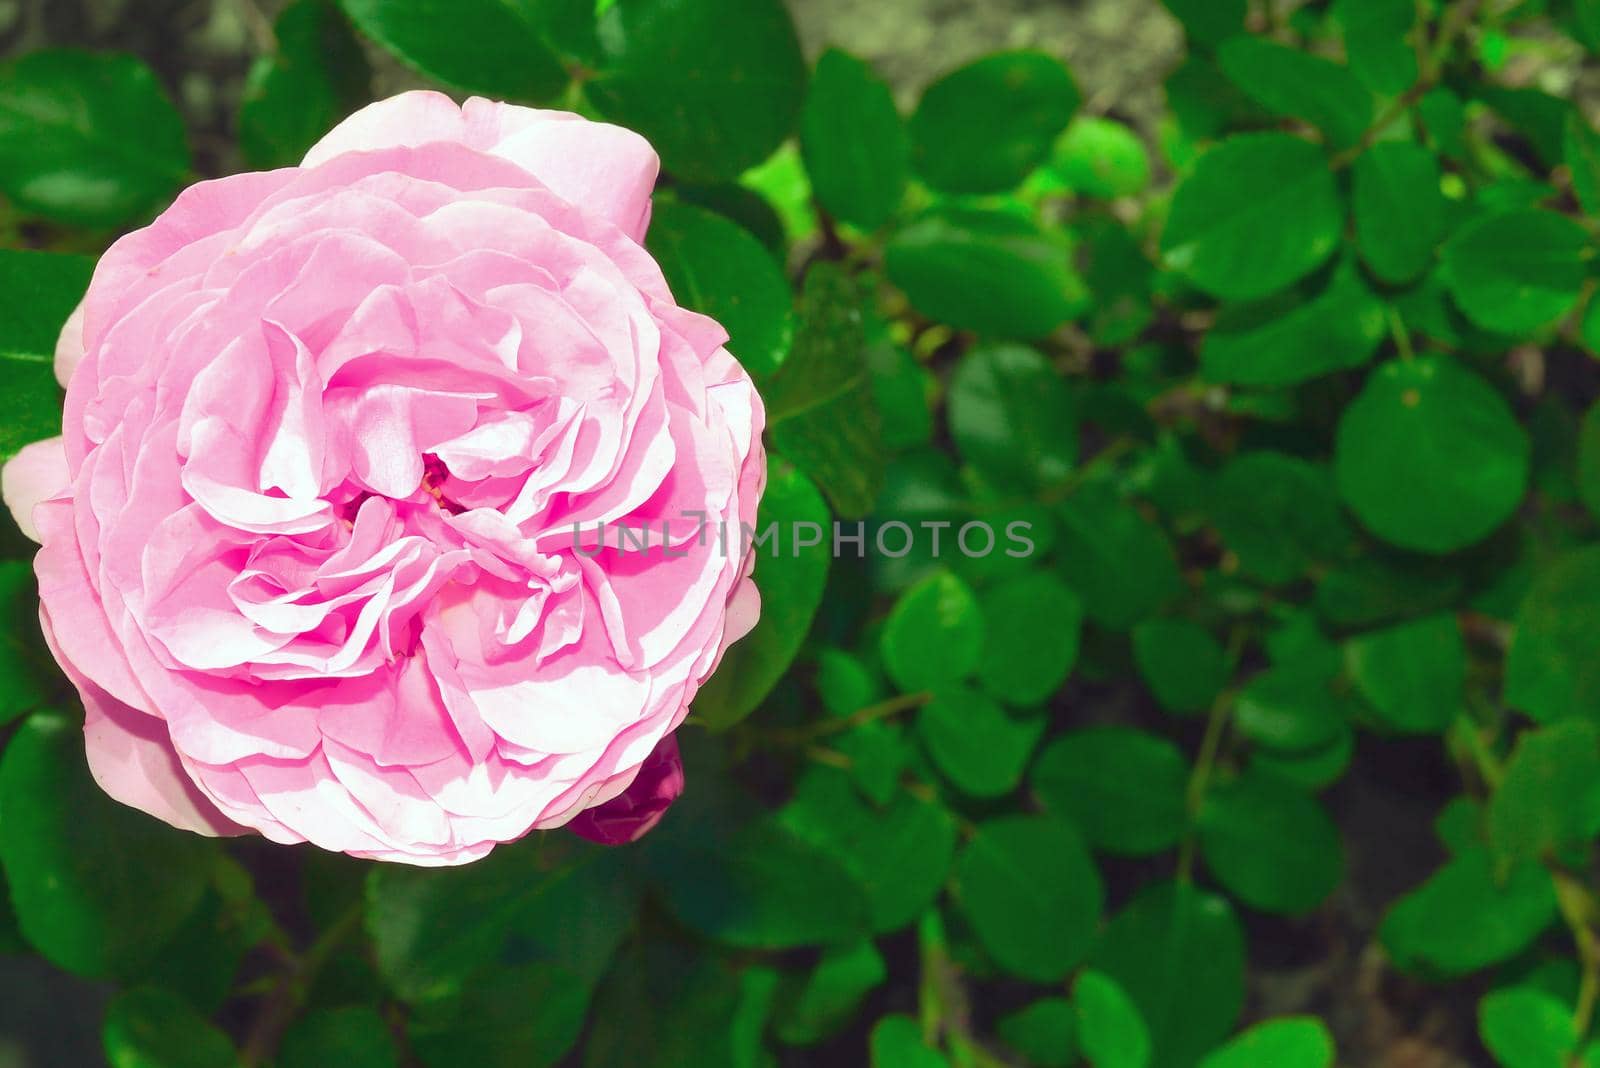 Pink rose in blurry natural background close up. Bright blooming pink rose head fully open in flower garden. Template or mock up. Top view.